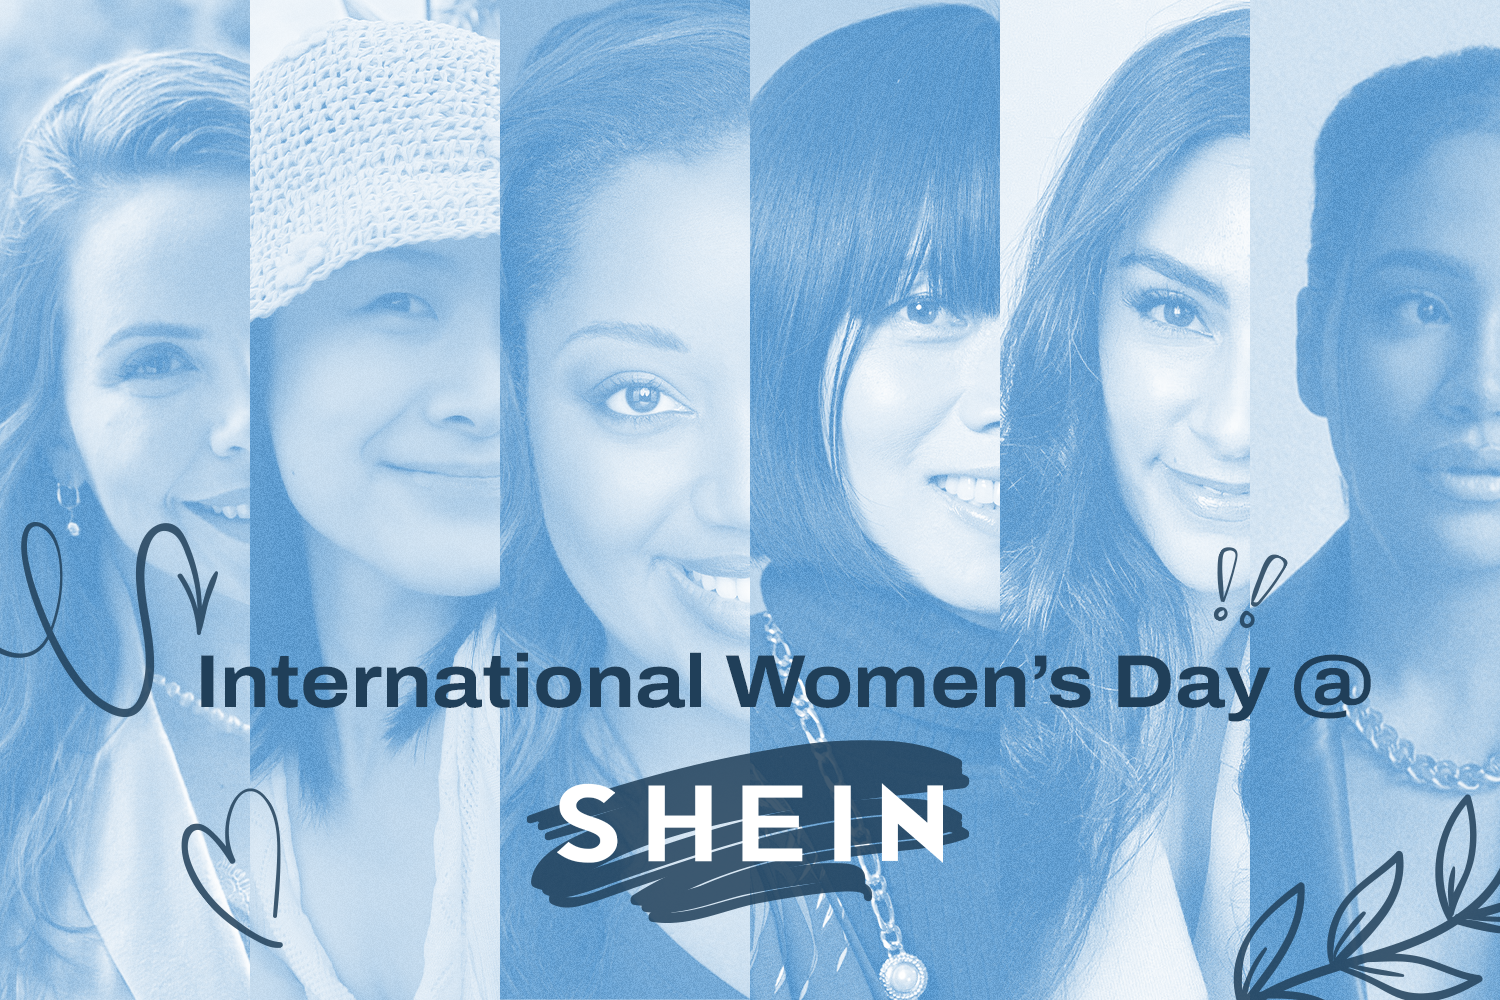 Cover photo for International Women's Day with a blue background showing photos of several women